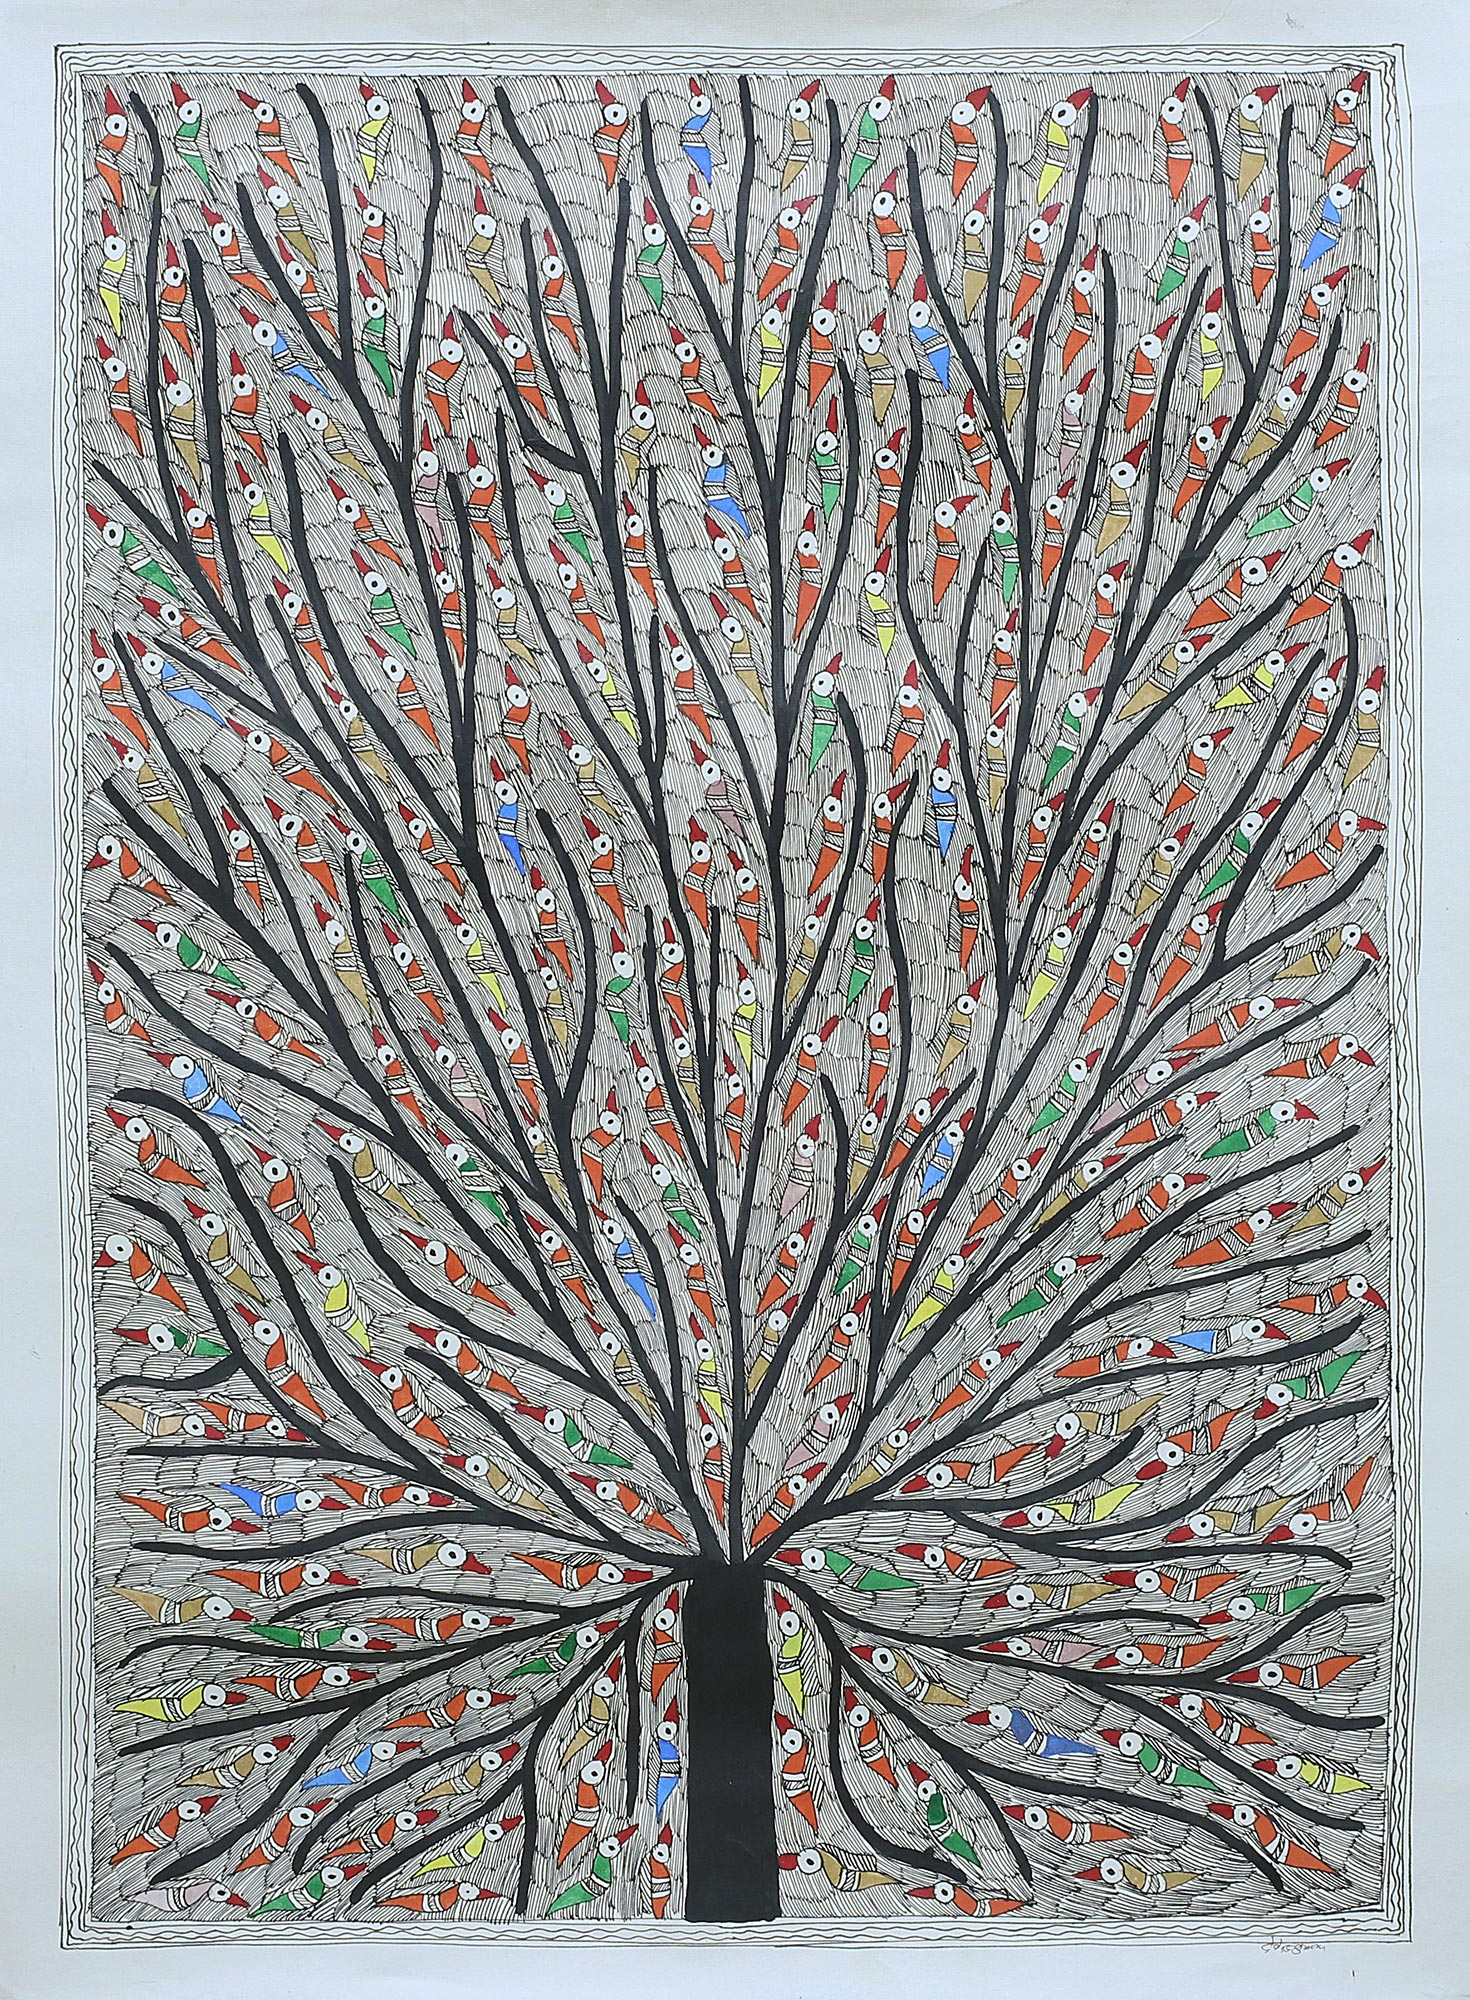 Unicef Market Multicolored Madhubani Painting Of A Tree With Birds Tree Of Life With Birds